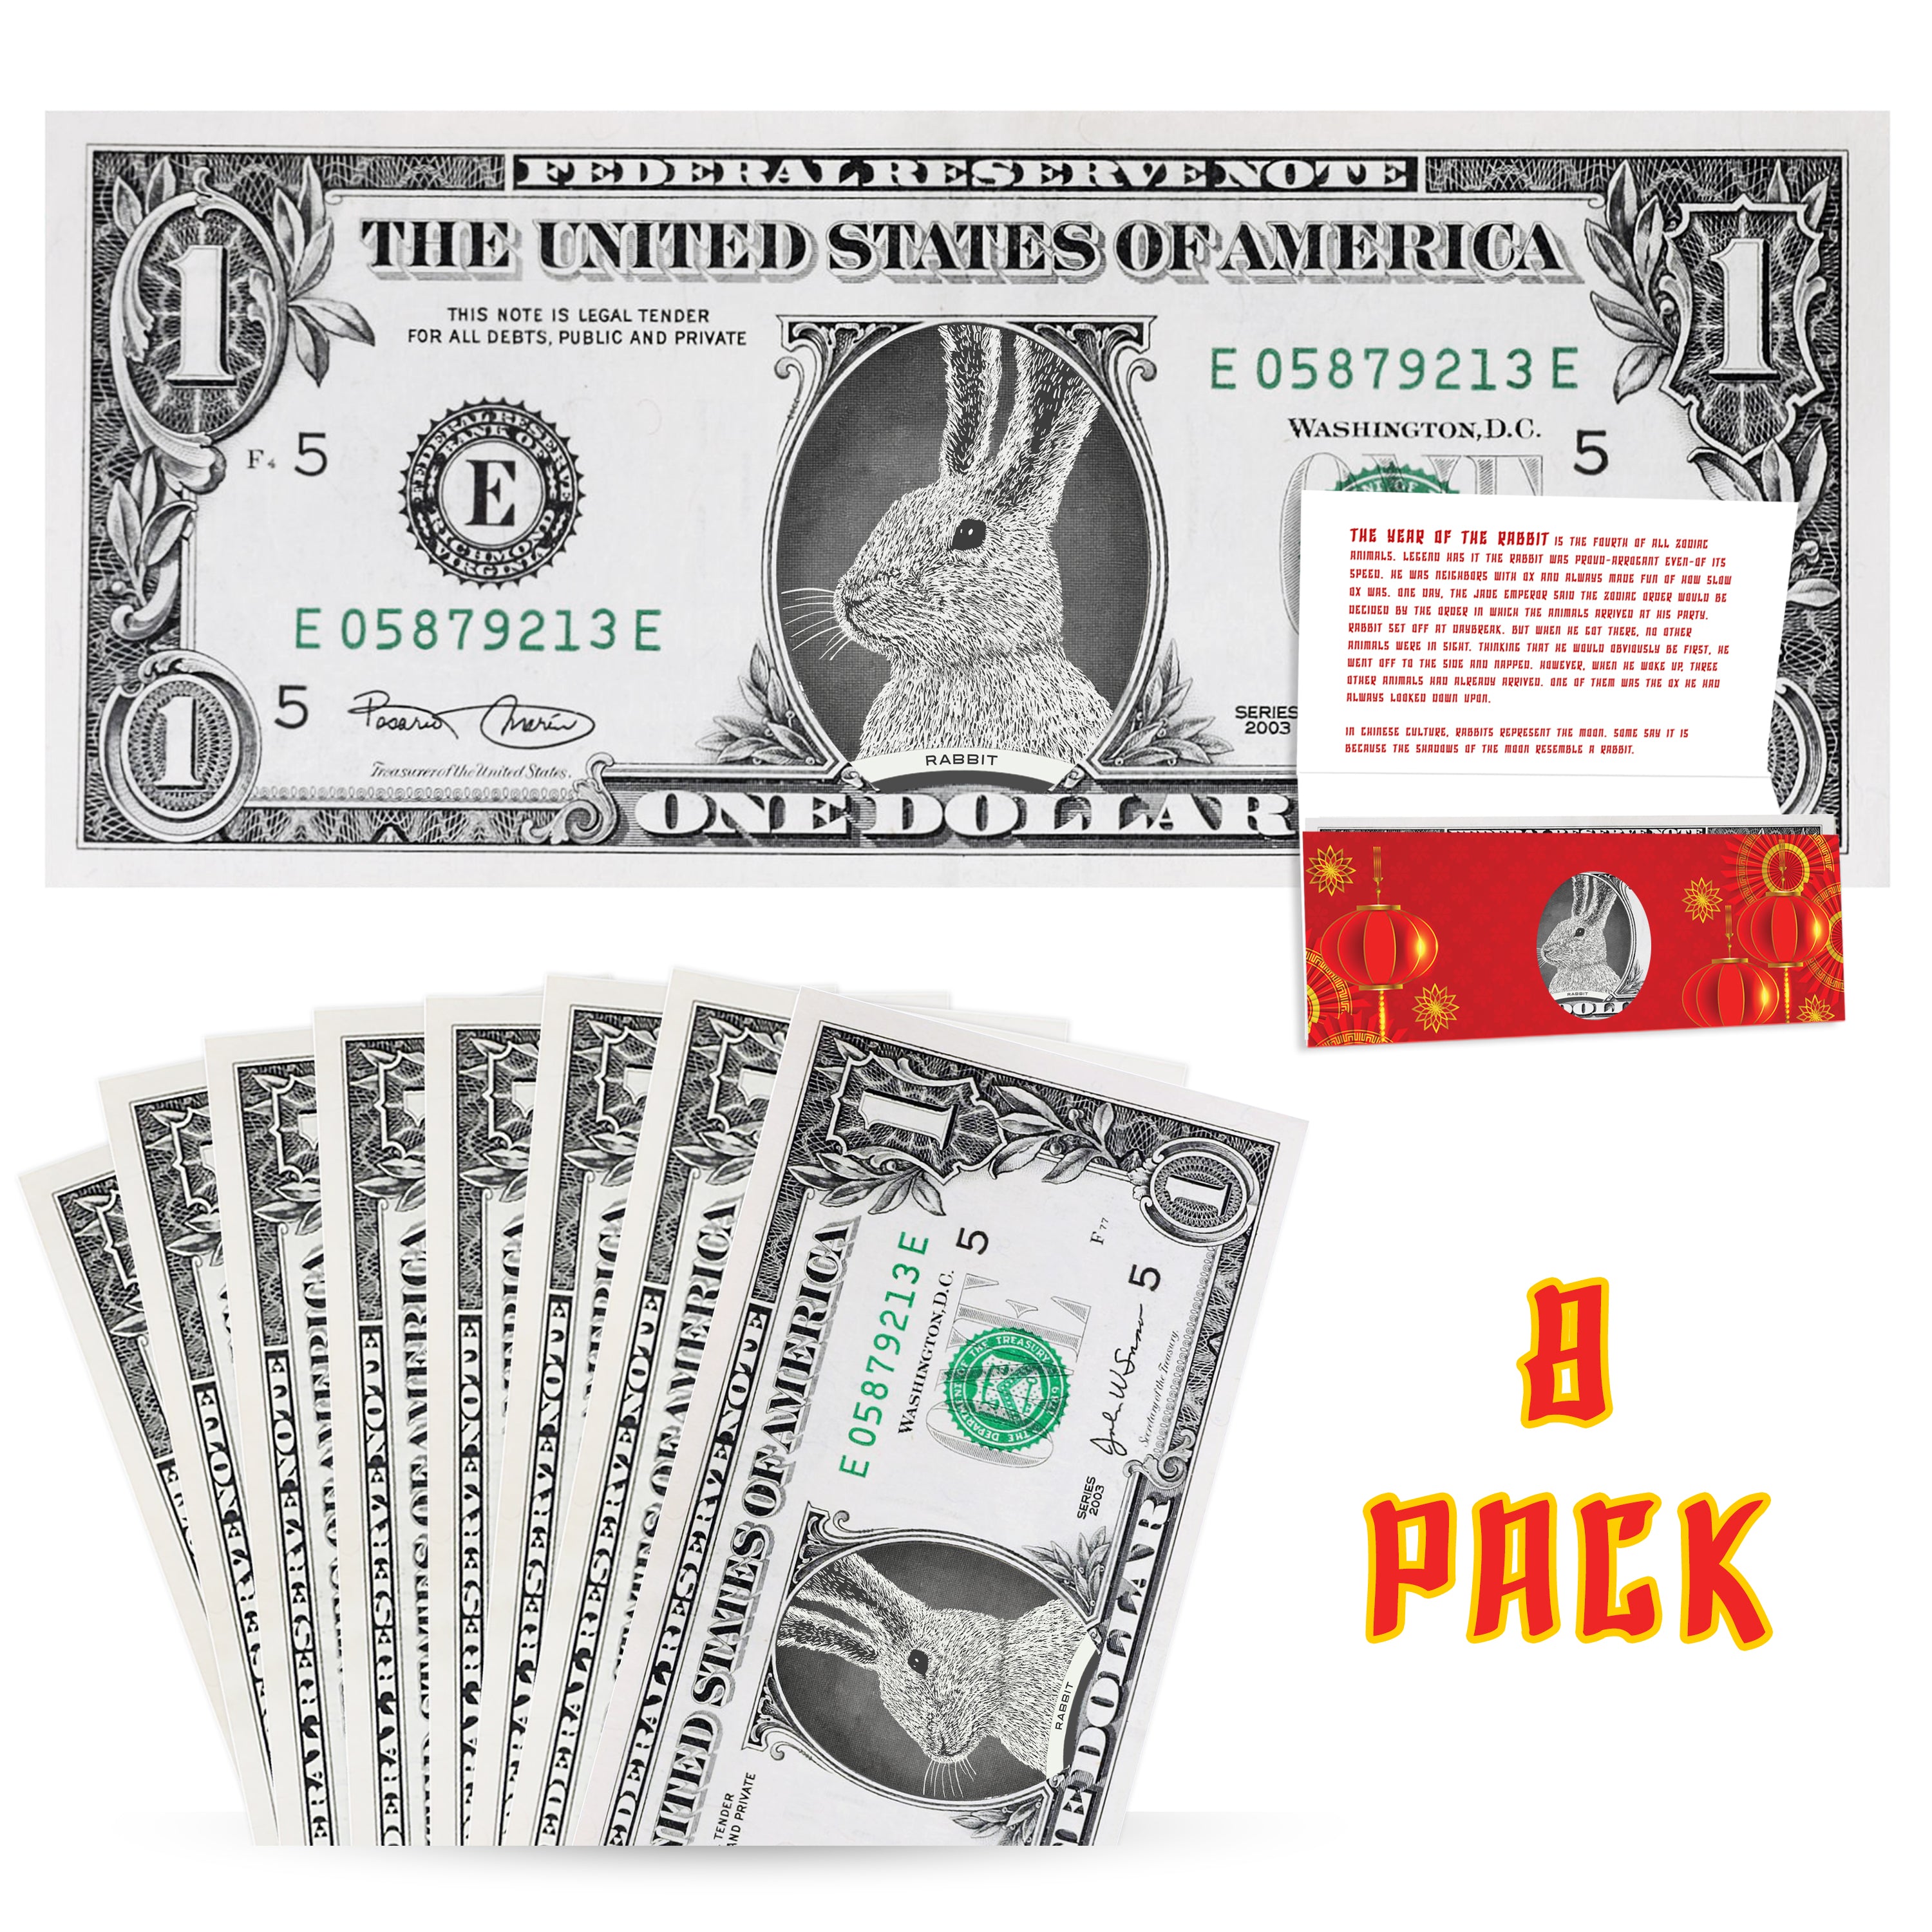 Official Chinese New Year Lucky Dollar Money : Real 1.0 USD